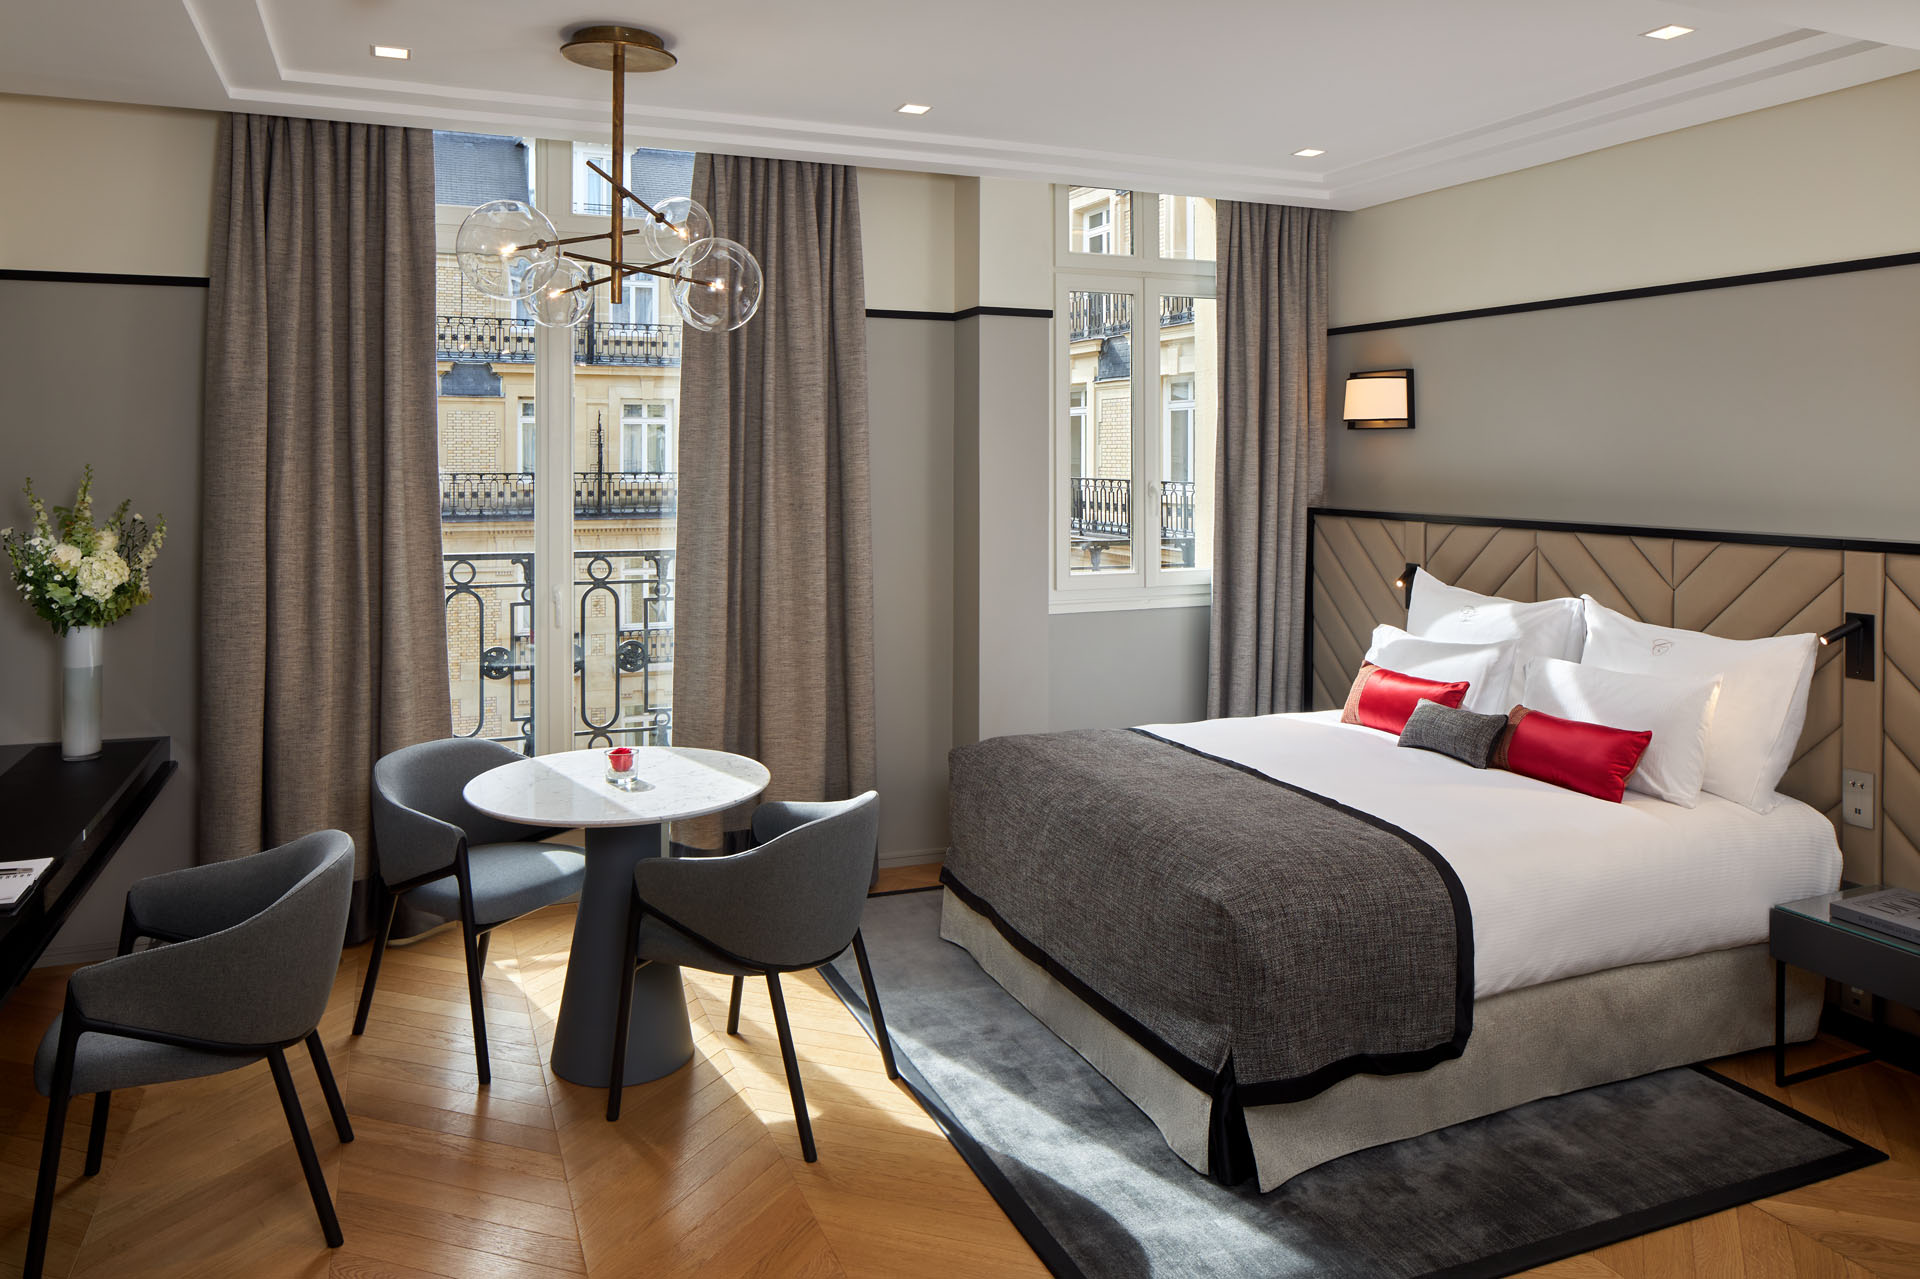 Overview of Hotel Apartments For Long Term Stay In Paris